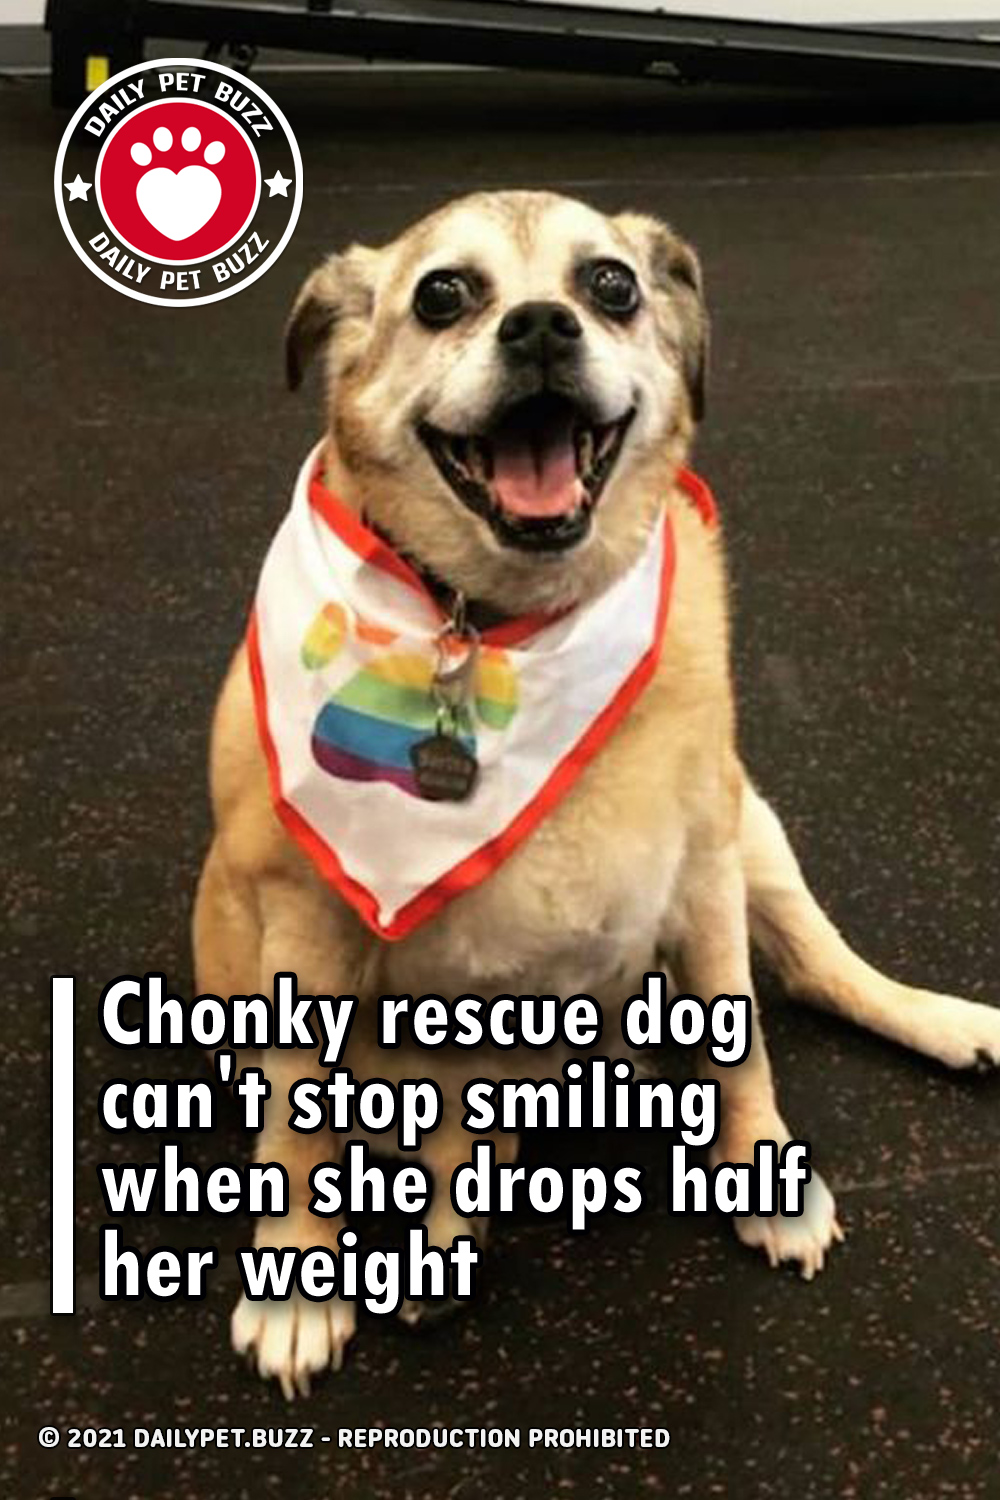 Chonky rescue dog can\'t stop smiling when she drops half her weight